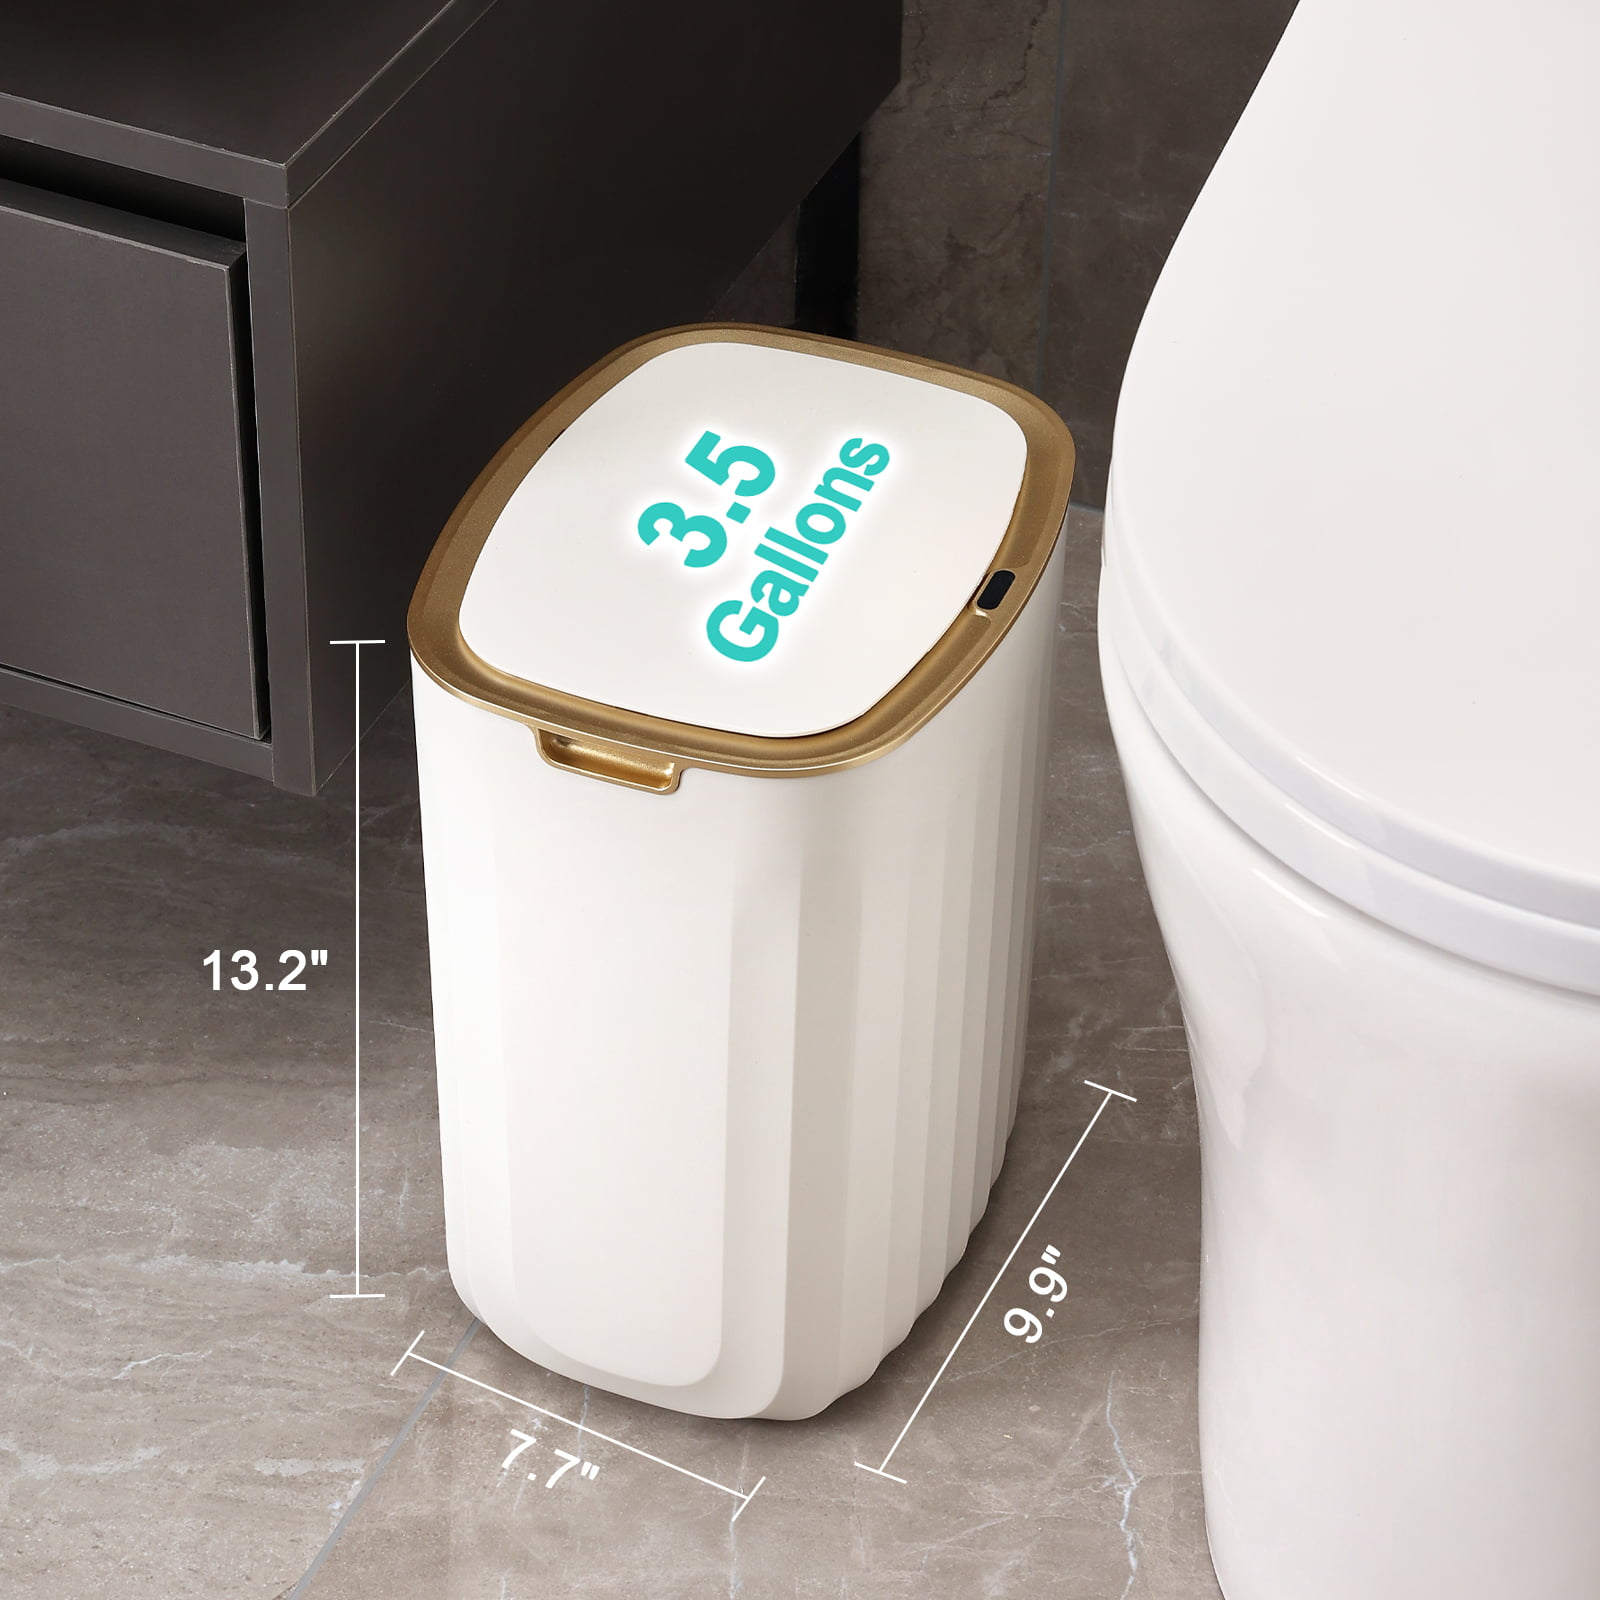 Bathroom Trash Can - ELPHECO - 9.5 Liter / 2.5 Gallon Automatic Trash Can  with Butterfly Lid, Brushed Stainless Steel Finish Office Trash Can, Motion  Sensor Trash Can for Bathroom, Office, Living Room 